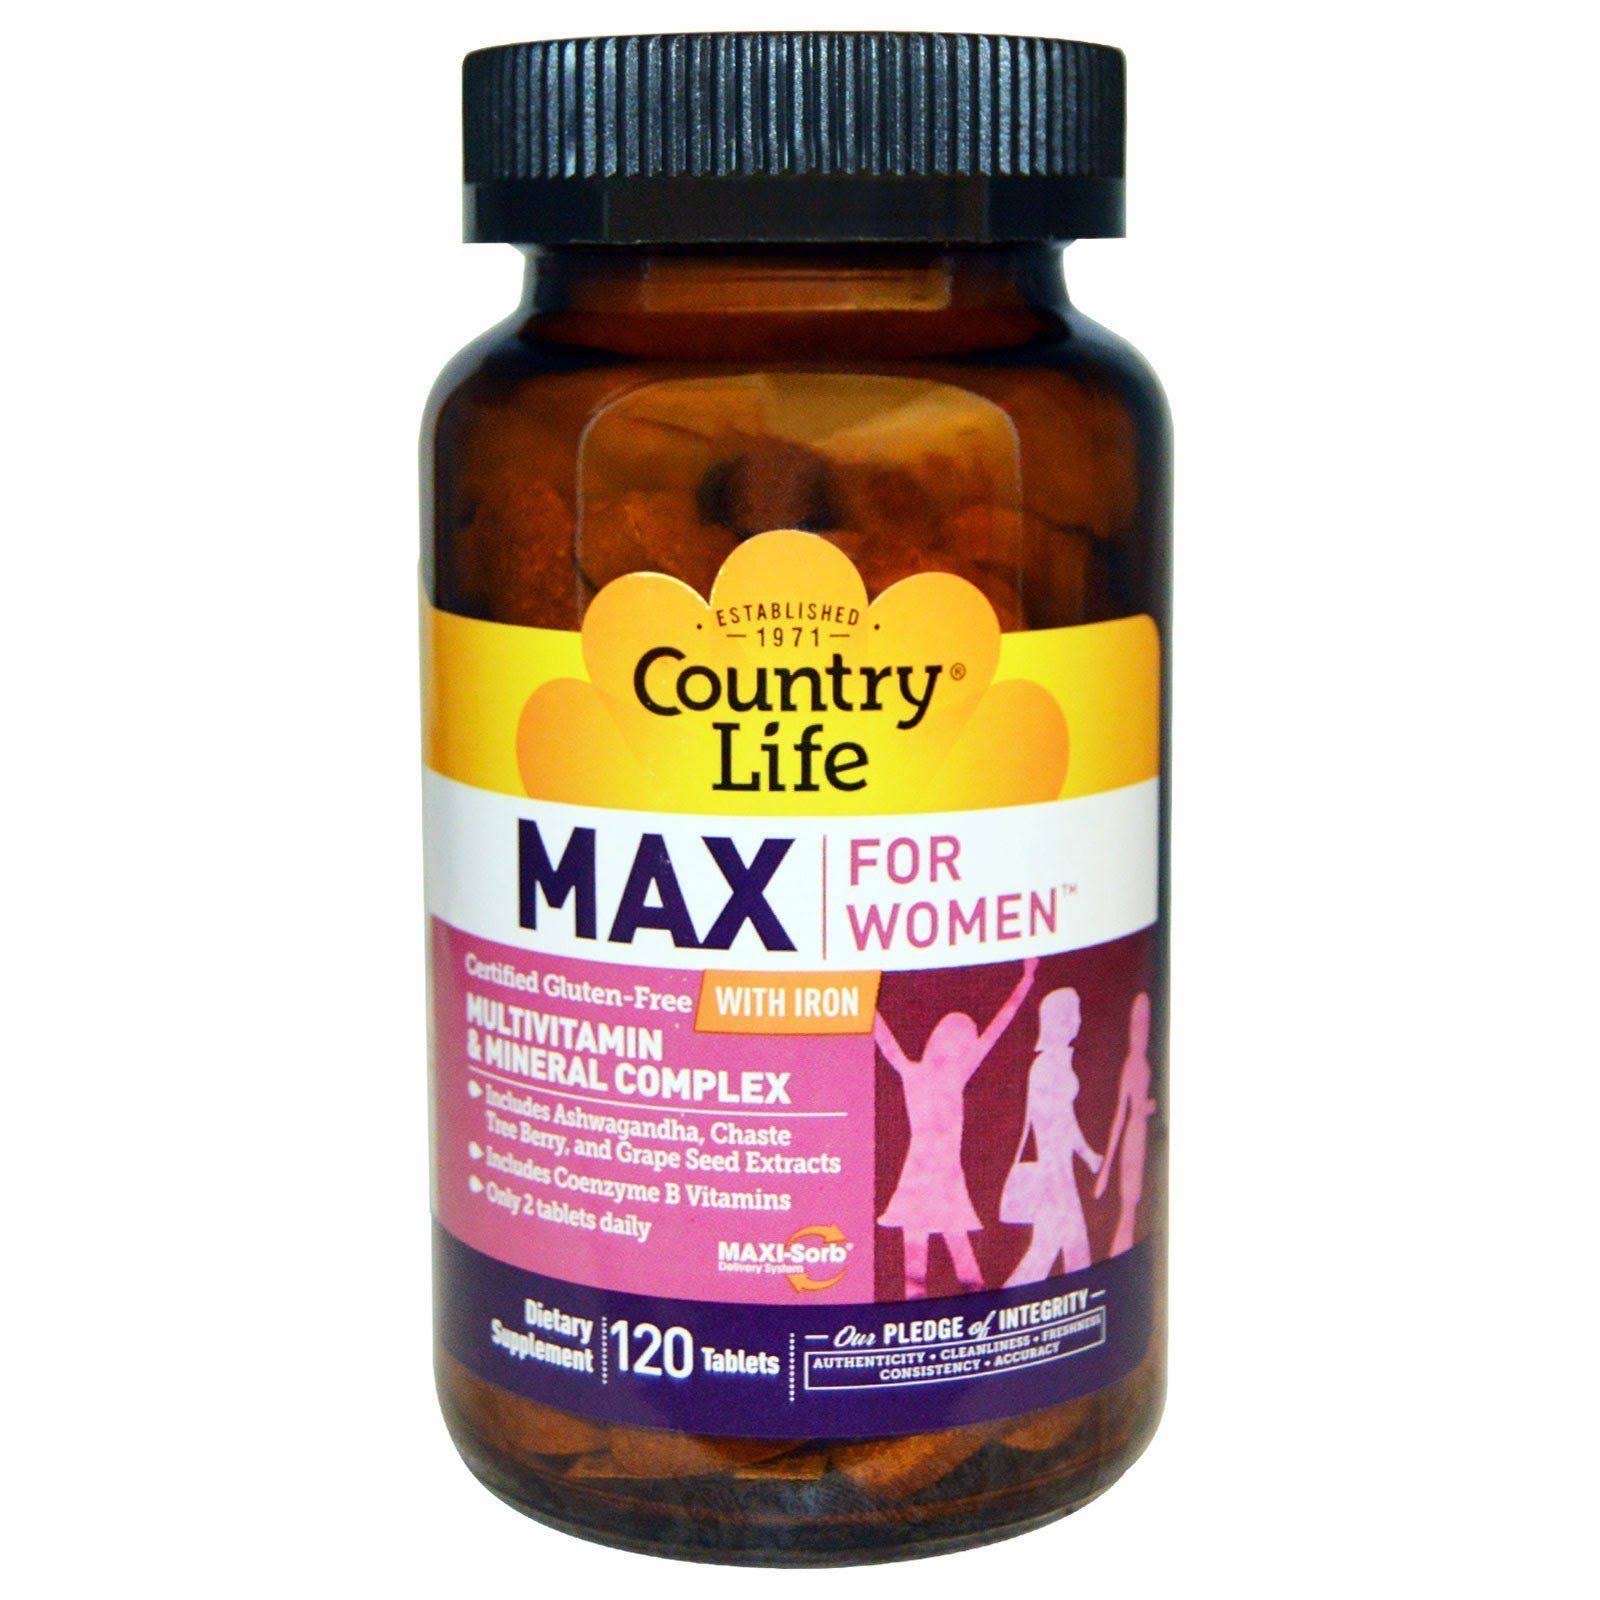 Country Life Max for Women Complex with Iron Multivitamin and Mineral - 120ct